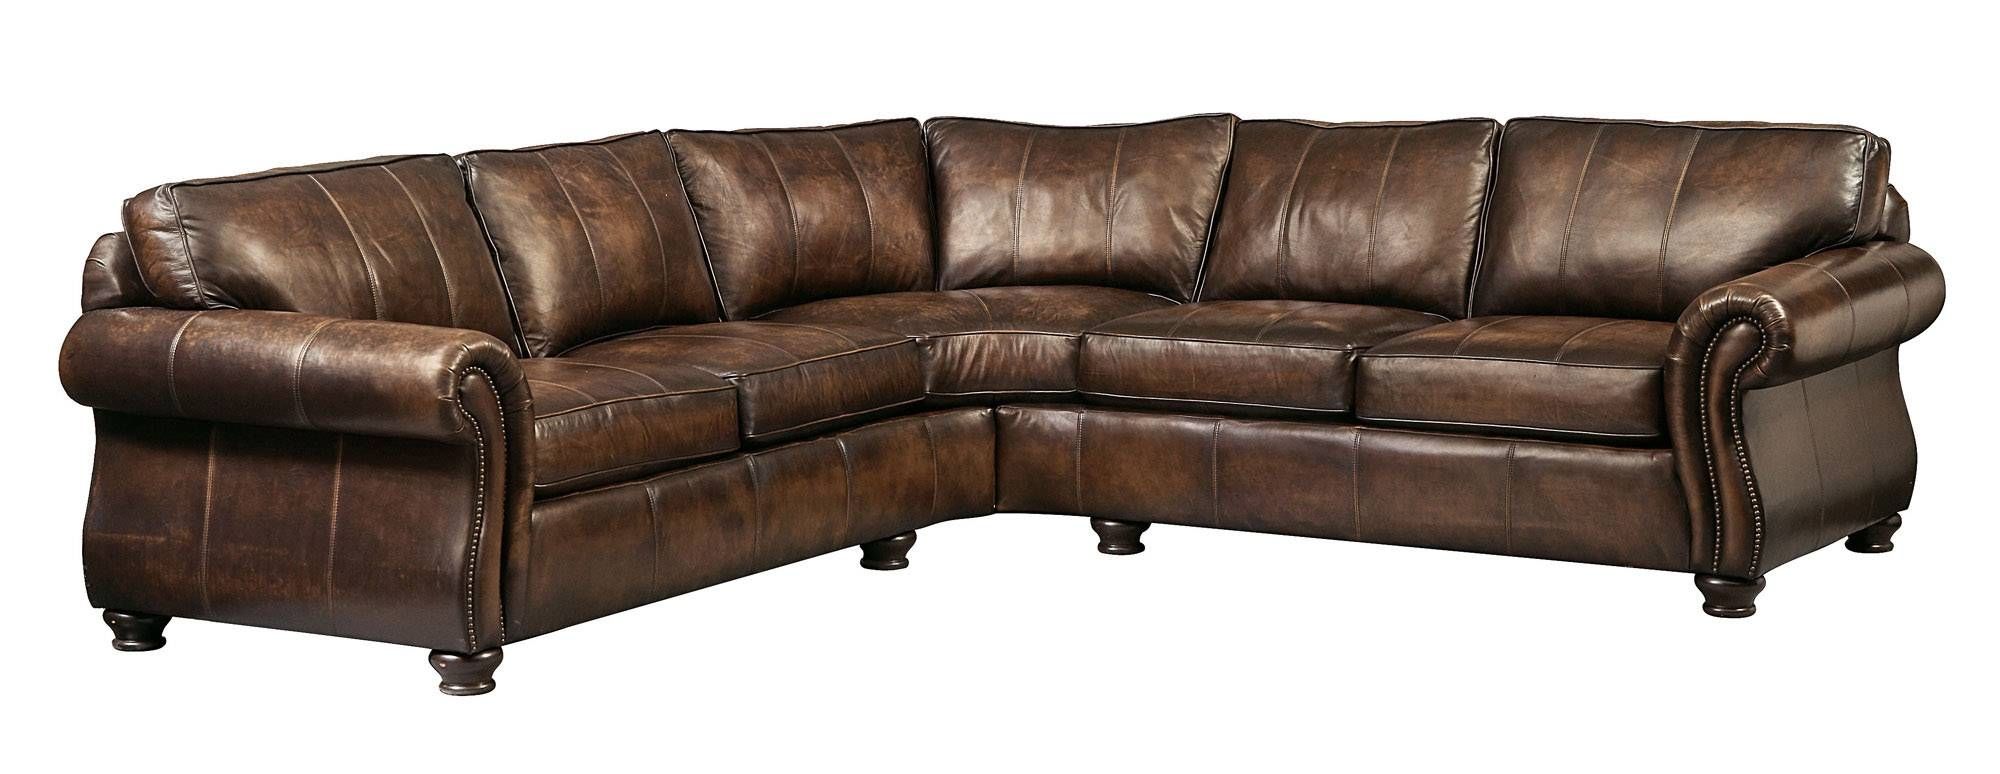 Leather Sectional | Bernhardt With Bradley Sectional Sofas (View 6 of 15)